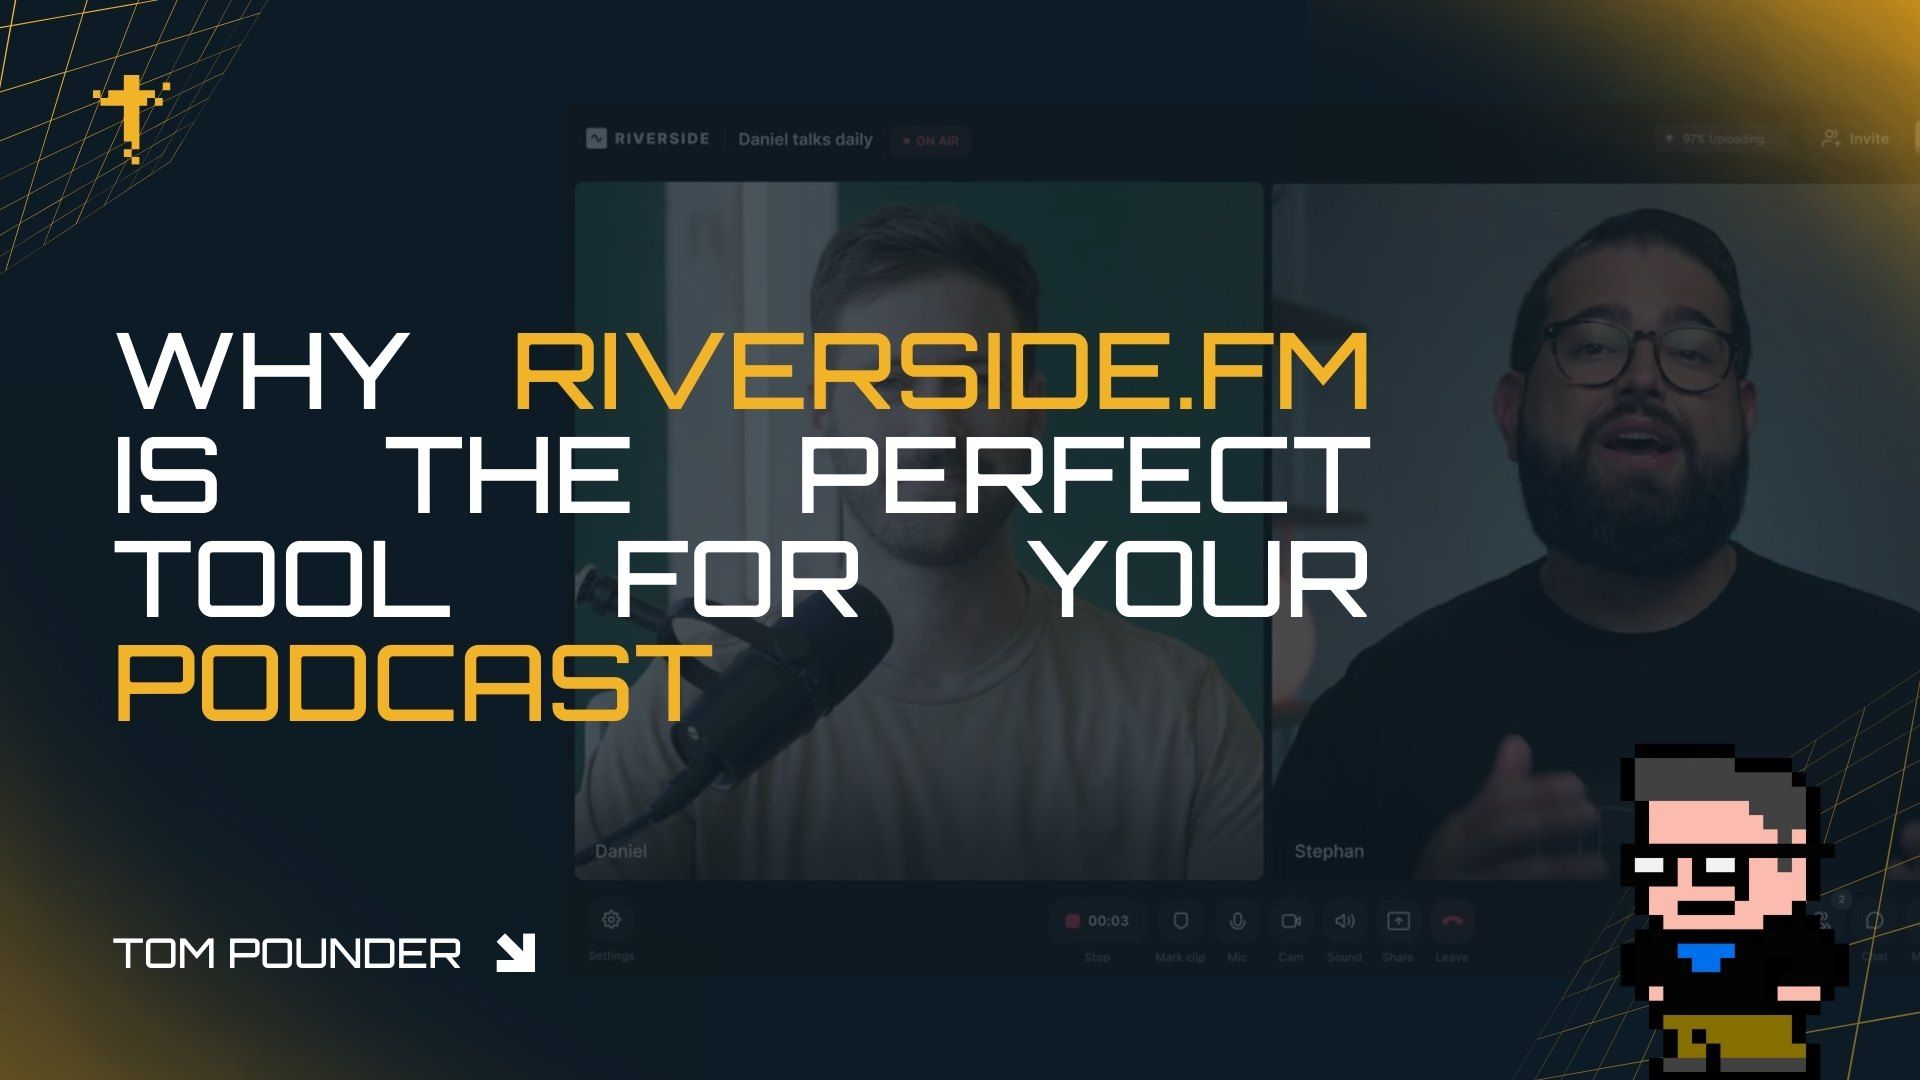 Why Riverside.fm is the Perfect Tool for Your Podcast